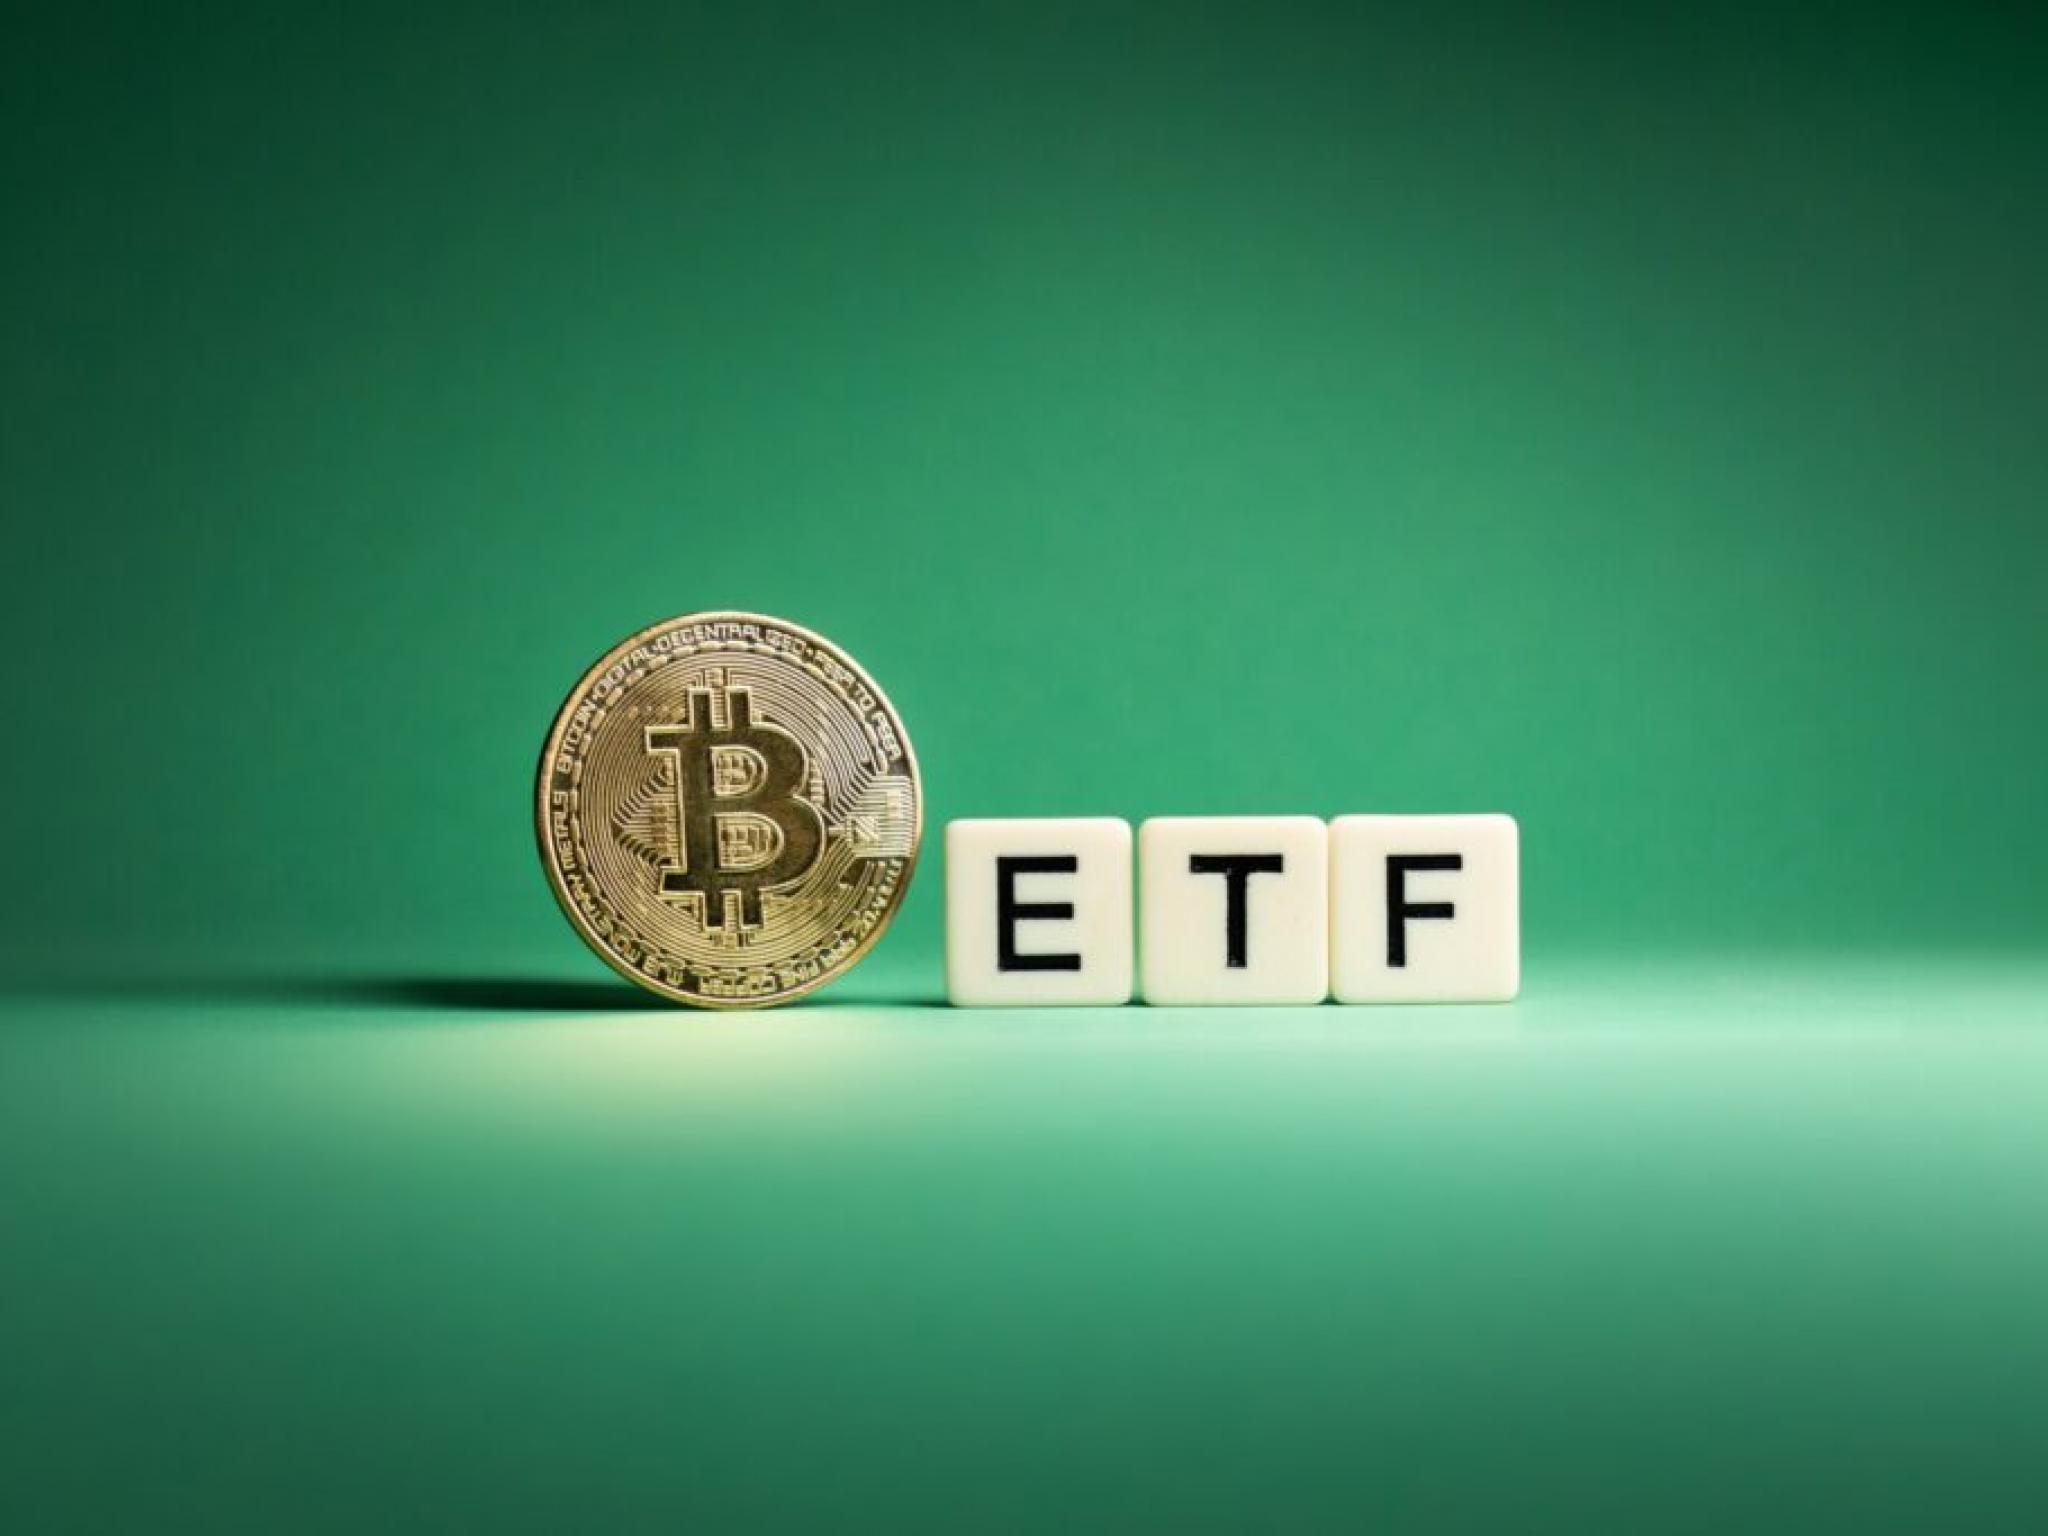  financial-advisors-slow-in-adopting-bitcoin-etfs-despite-self-directed-investor-surge-blackrock-executive-says-i-would-call-them-wary 